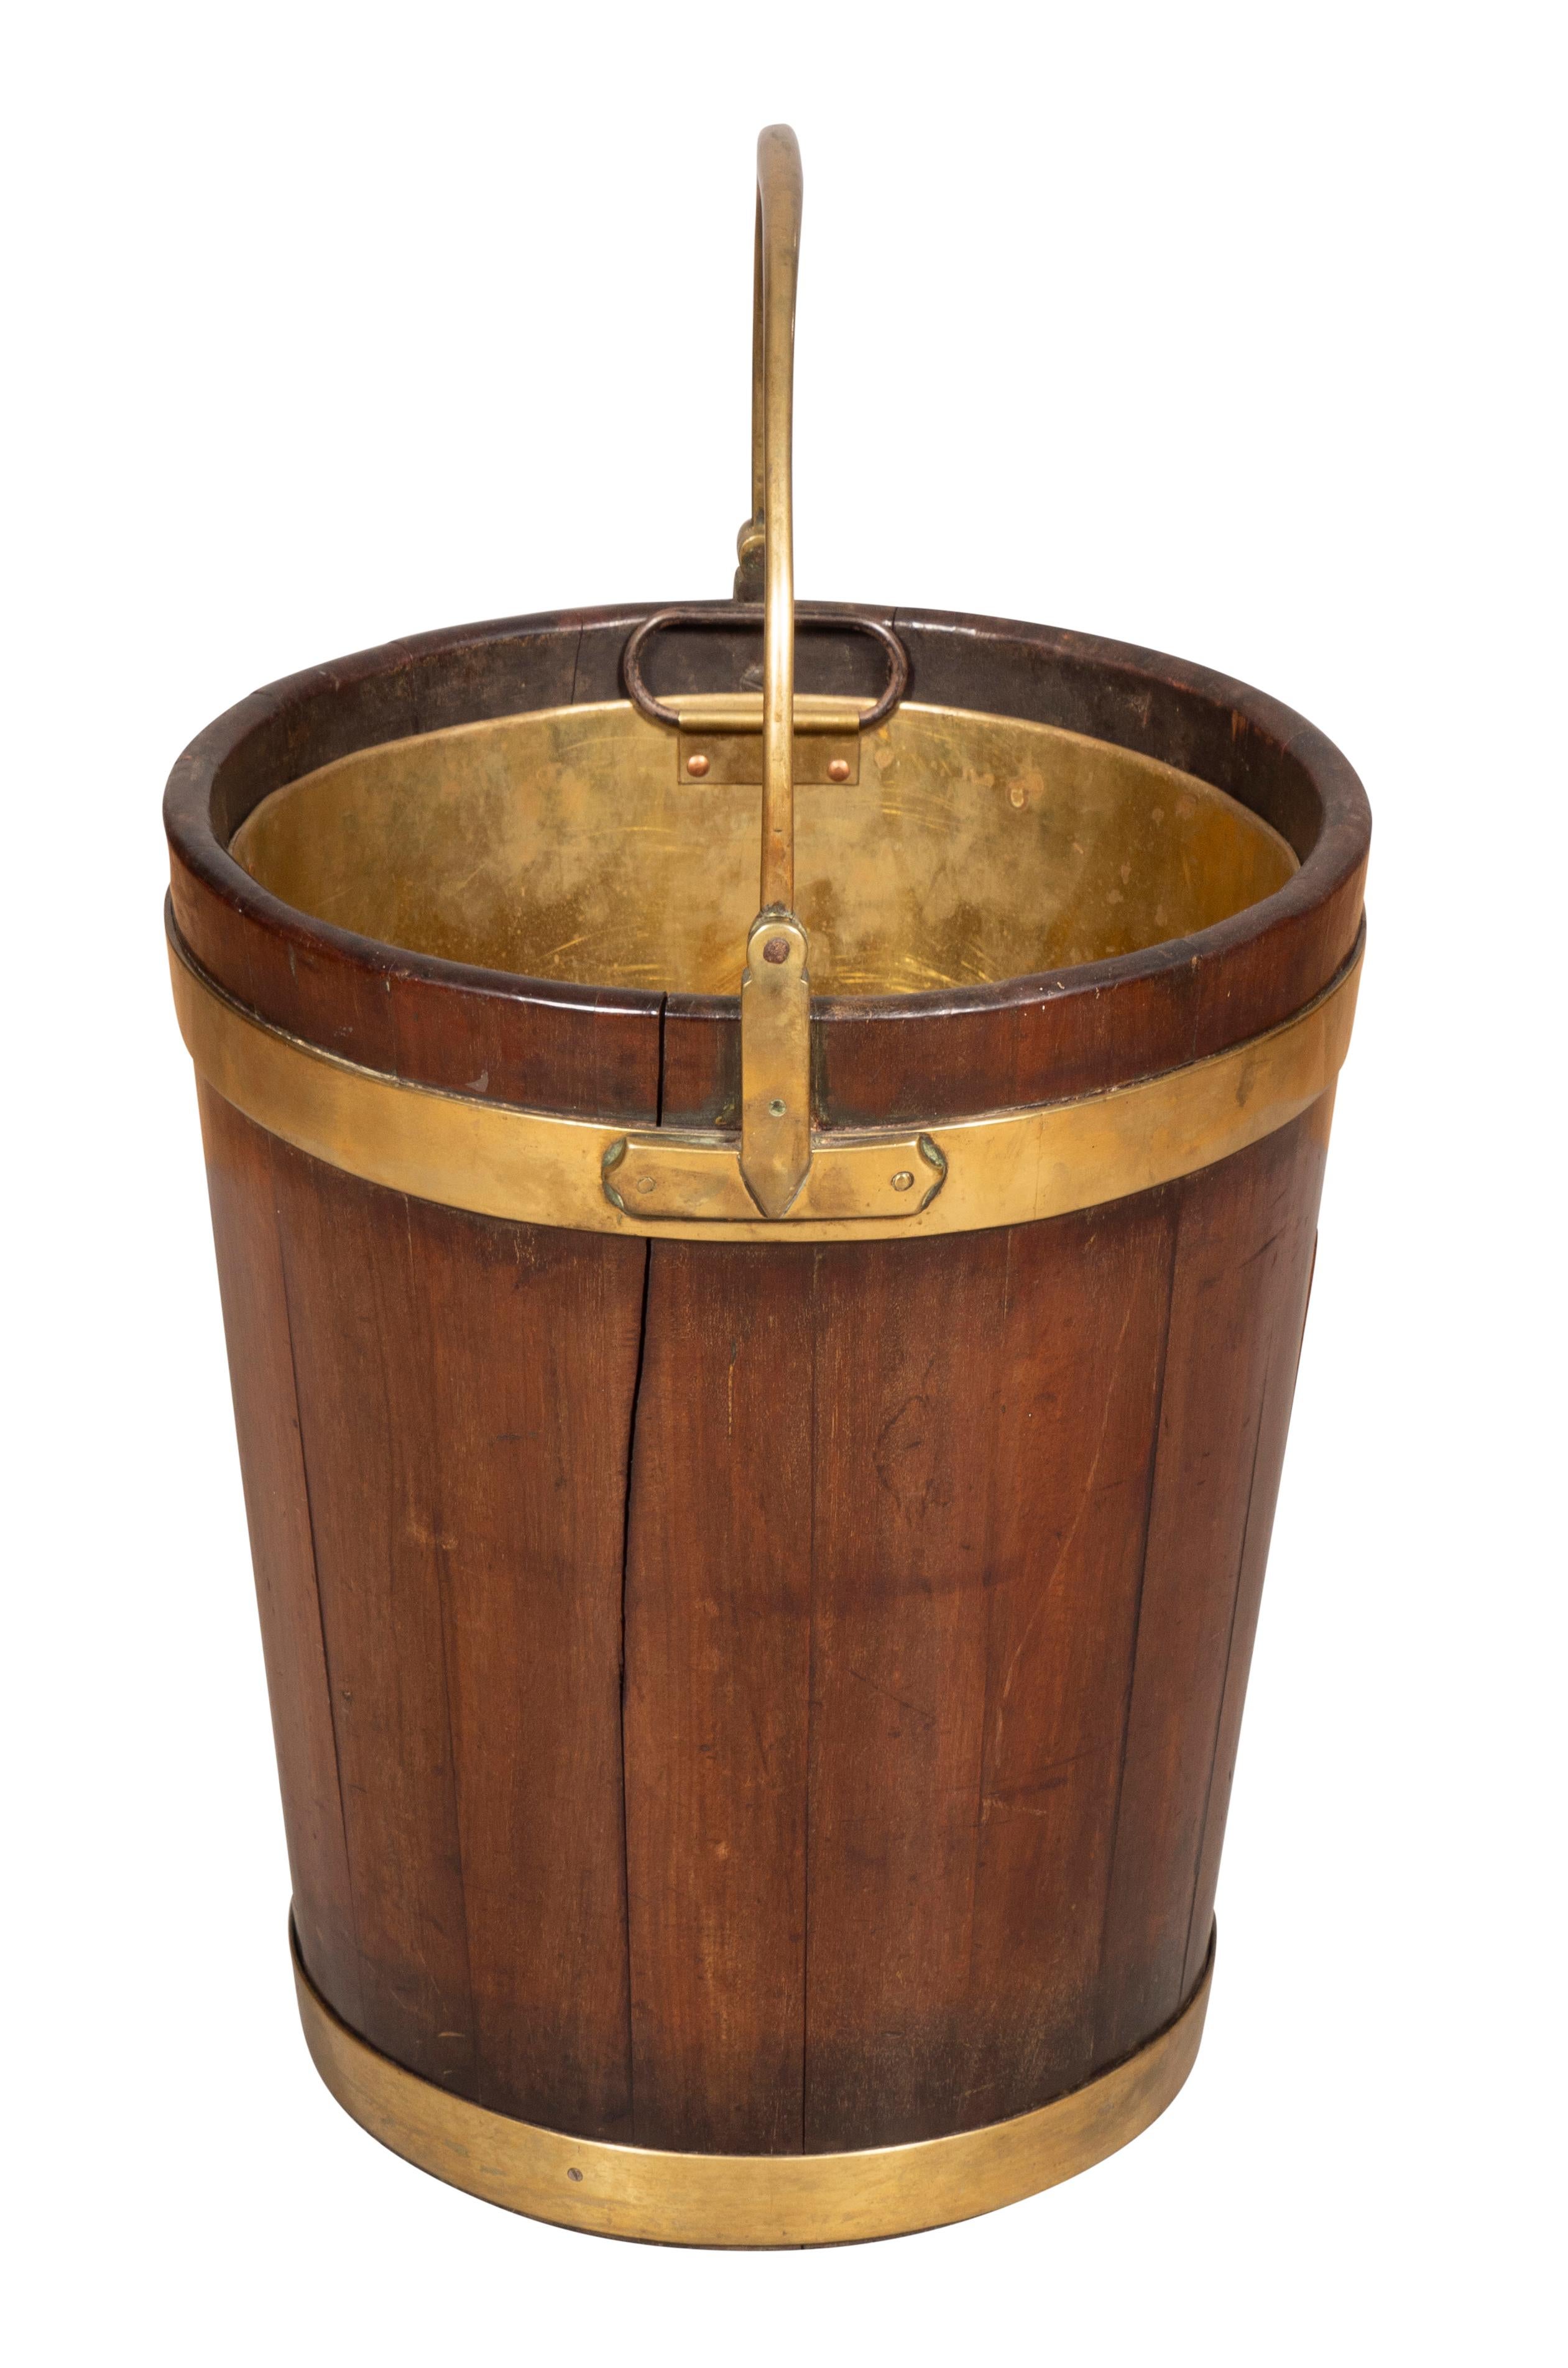 Handle up 24 high. With brass handle and cylindrical bucket with brass strapping. Removable brass liner.